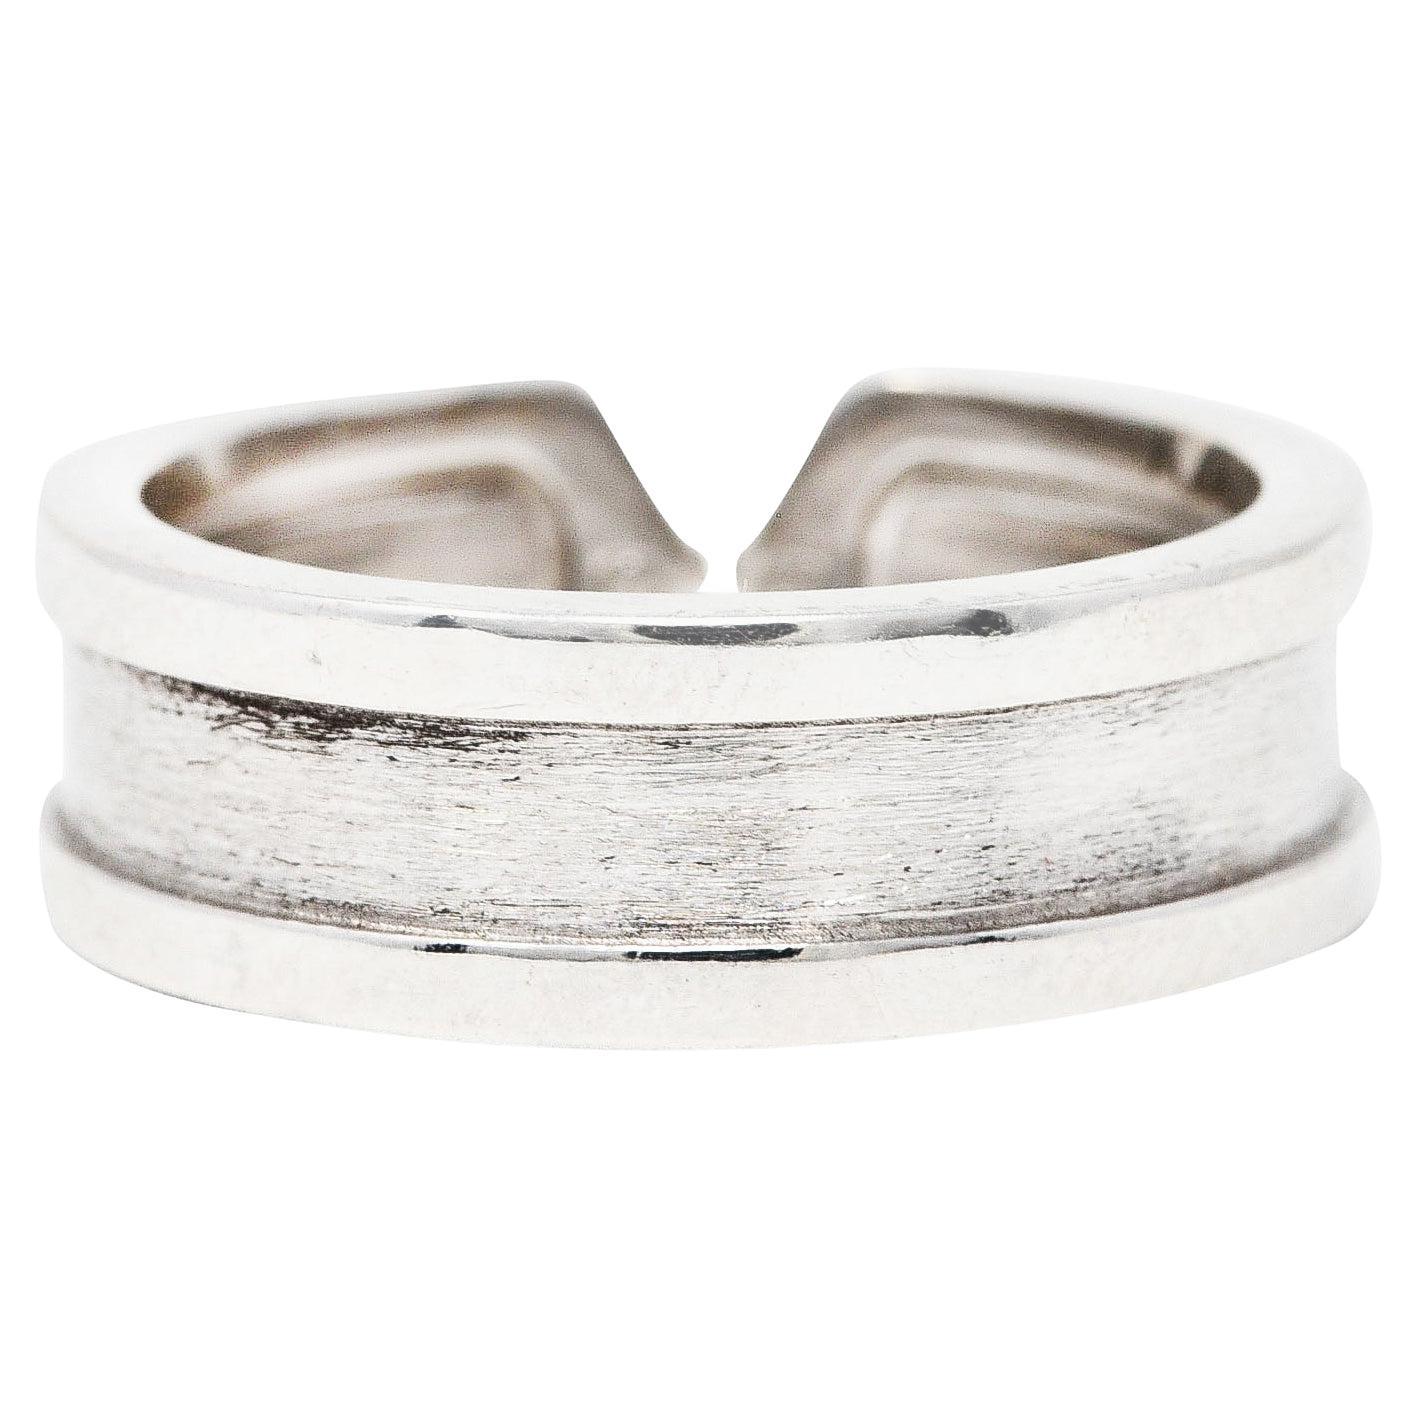 Ring designed as a grooved channel band. Featuring high polished edges and a brushed white gold finish. Completed by two stylized 'C' terminals. Stamped 750 with French and Swiss assay marks for 18 karat gold. Numbered and fully signed Cartier.